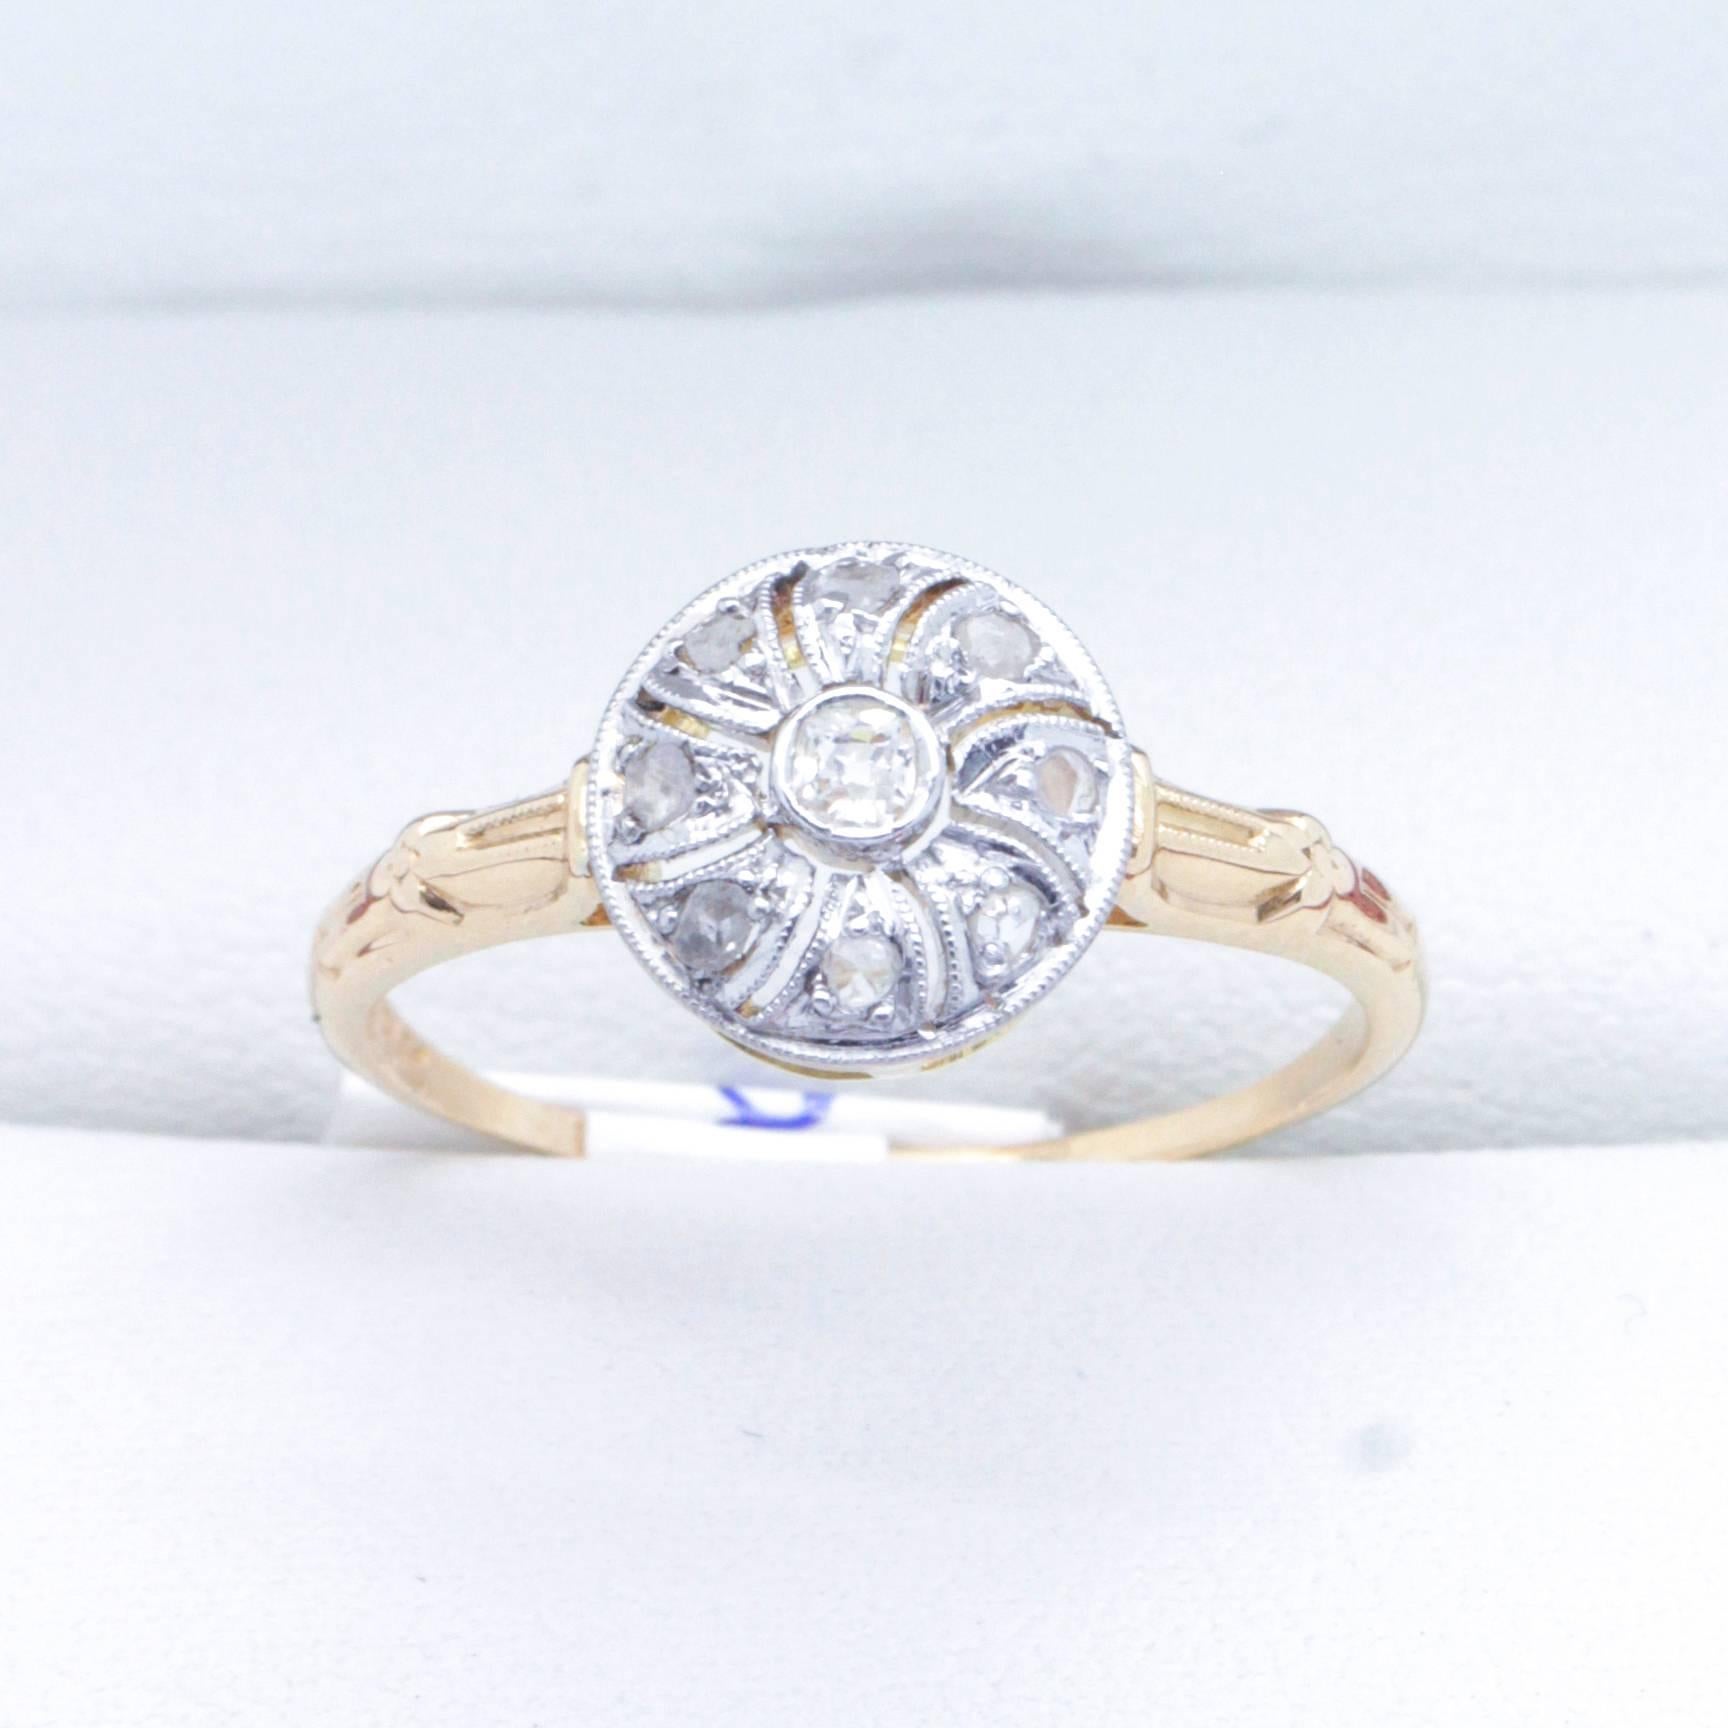 Divine Handmade, Art Deco, Gold Diamond ring. Would make a lovely engagement ring!
-
14ct Yellow gold, Art Deco Vintage Diamond ring with Old Rose cut Diamonds in a round "pinwheel" design front and detailed carved shoulders. Would make a